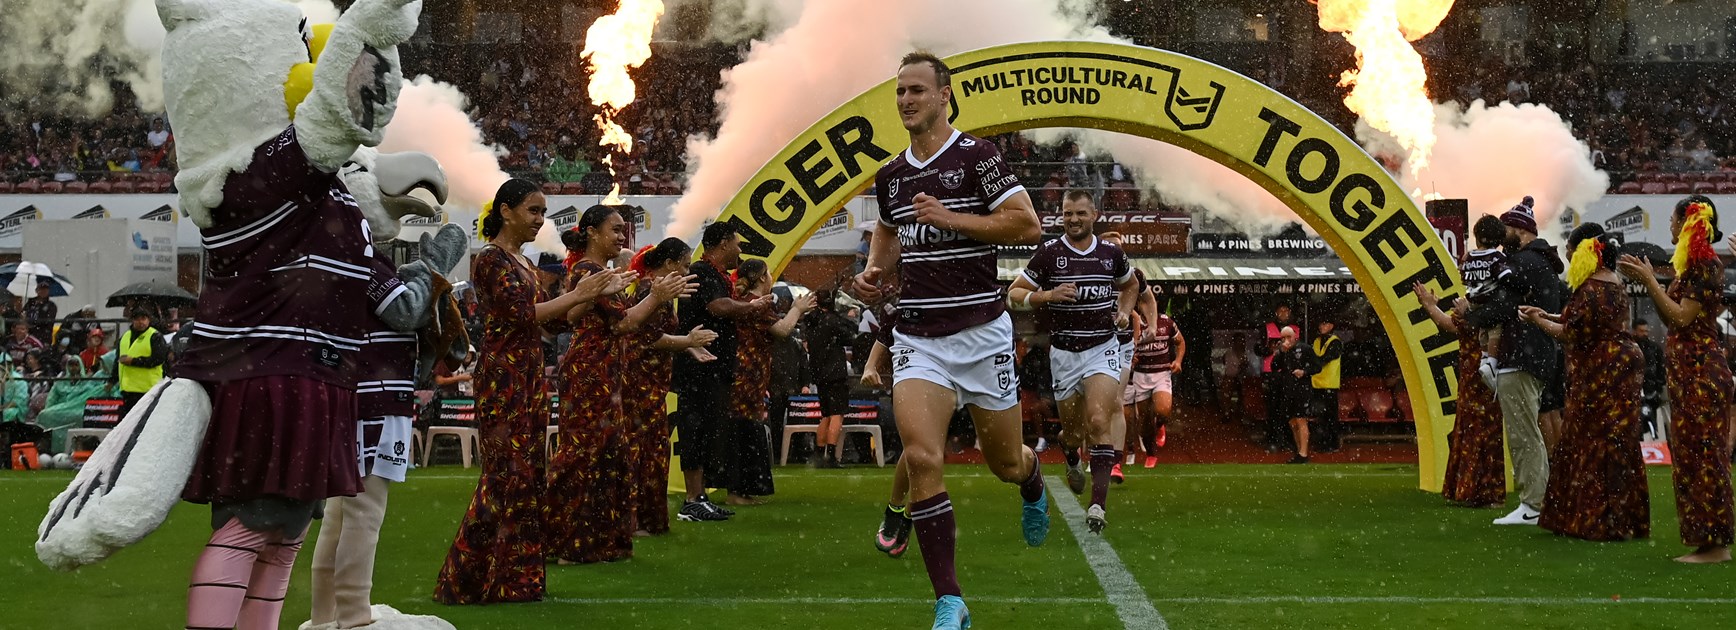 Sea Eagles to kick off NRL Multicultural Round